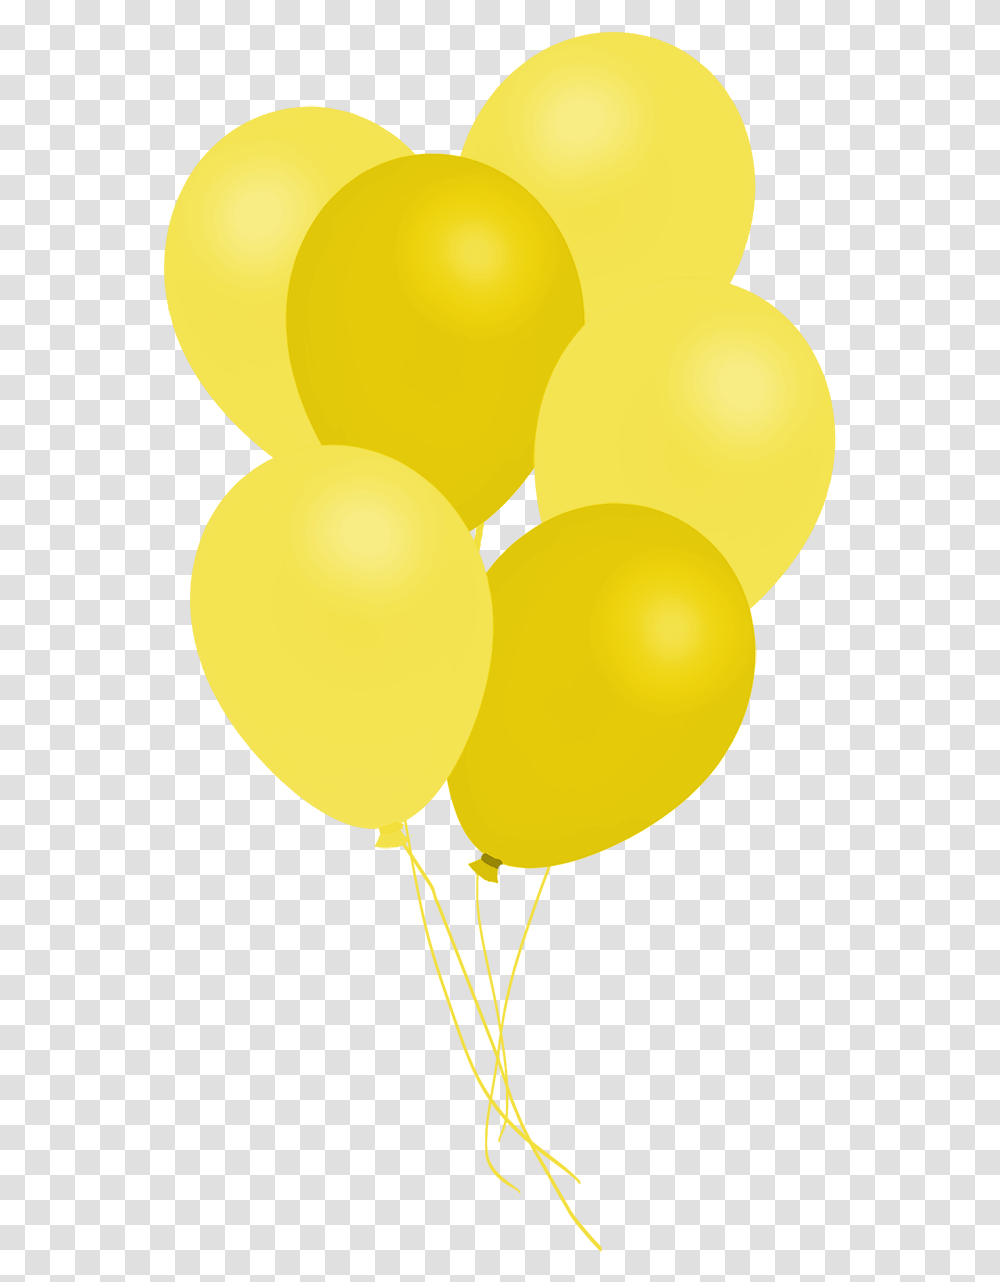 Bunch Of Yellow Balloons Balloon Transparent Png